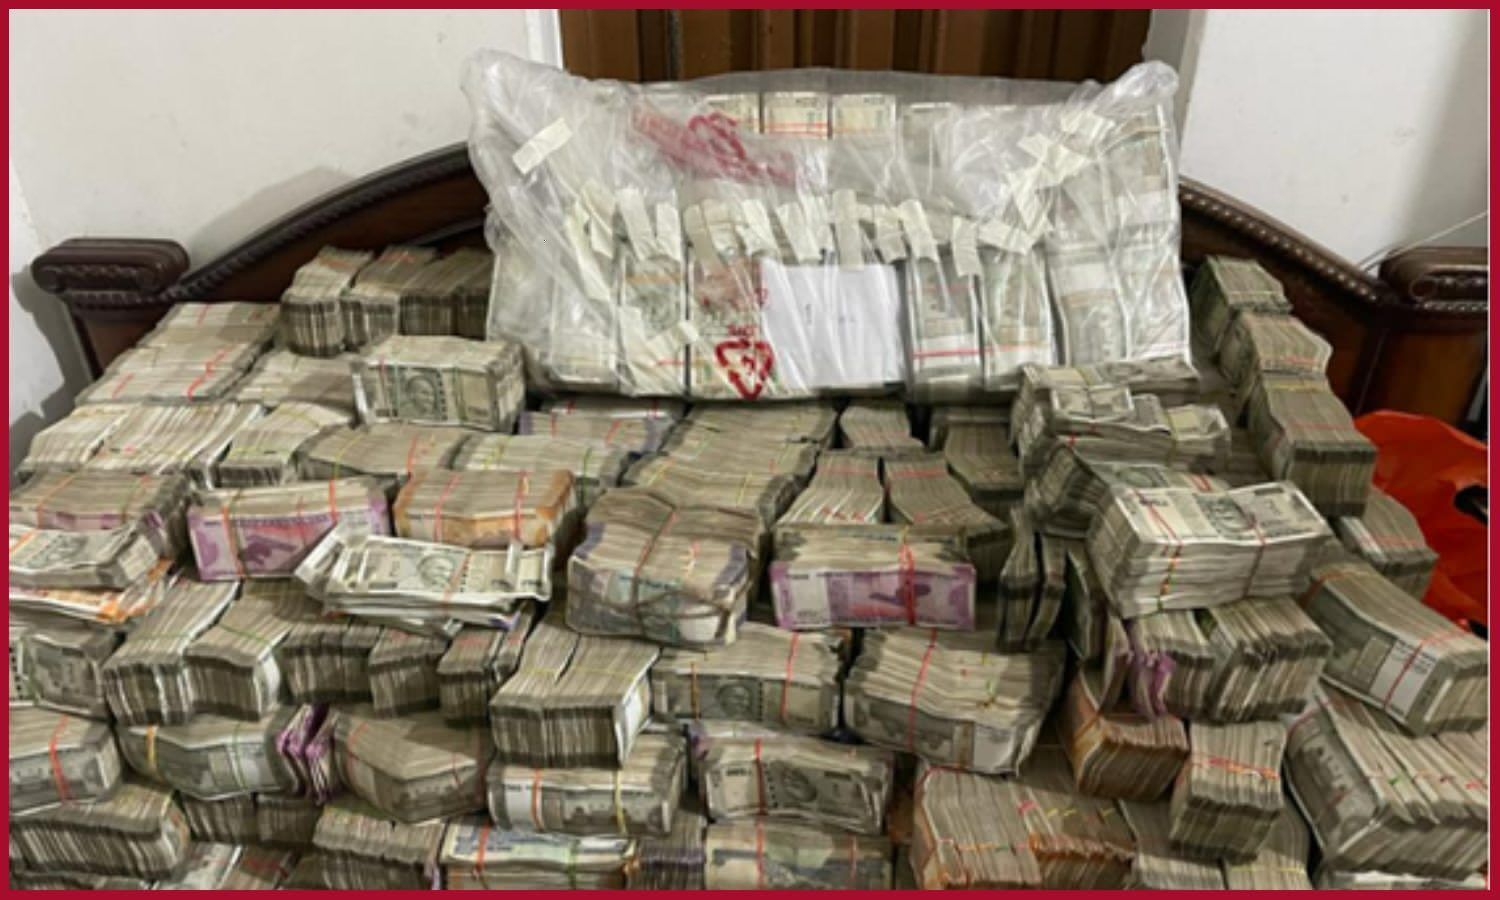 ED Raid in Kolkata: ED activated again in West Bengal, raided 6 locations, 7 crore cash recovered